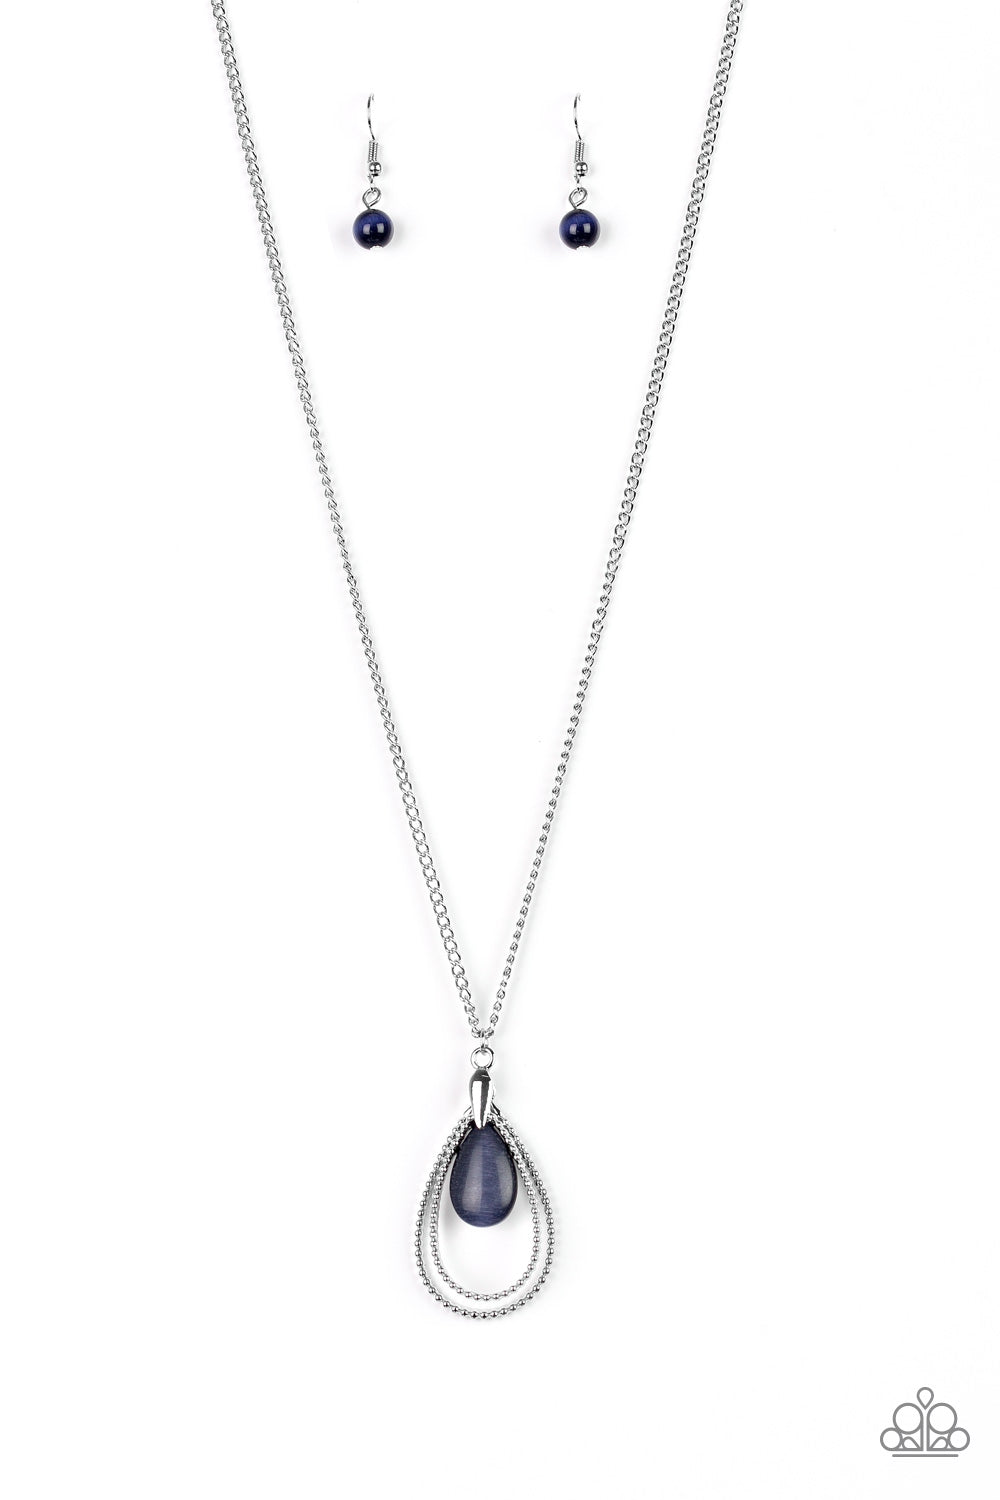 Paparazzi Accessories - Teardrop Tranquility #N579 - Blue Necklace